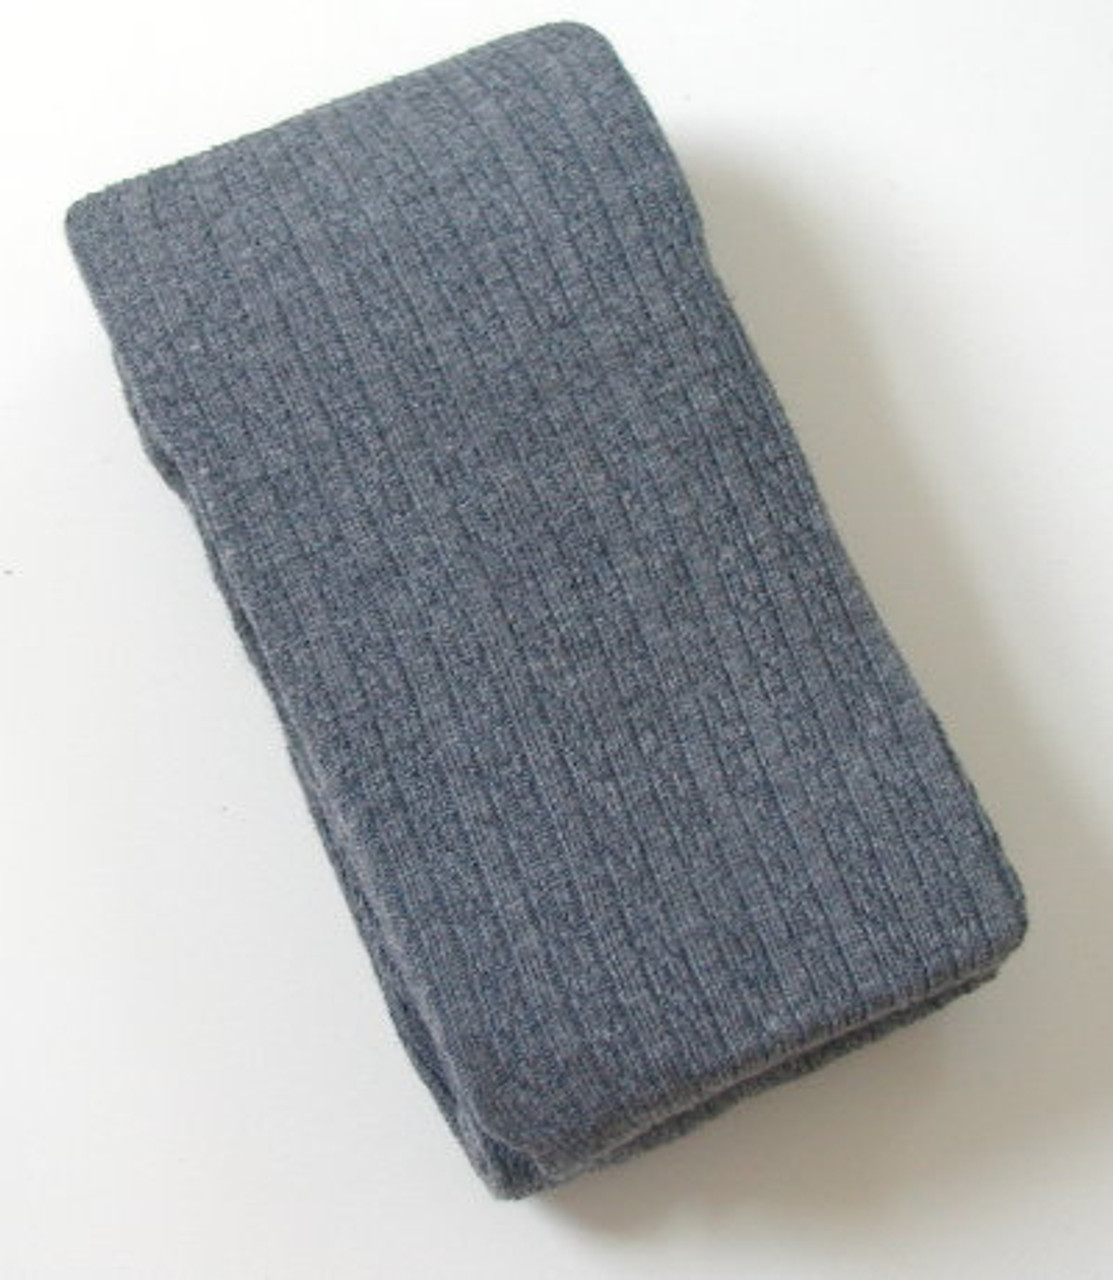 Girls Tights - Gray Cable Knit Heavy Size 4 - 6